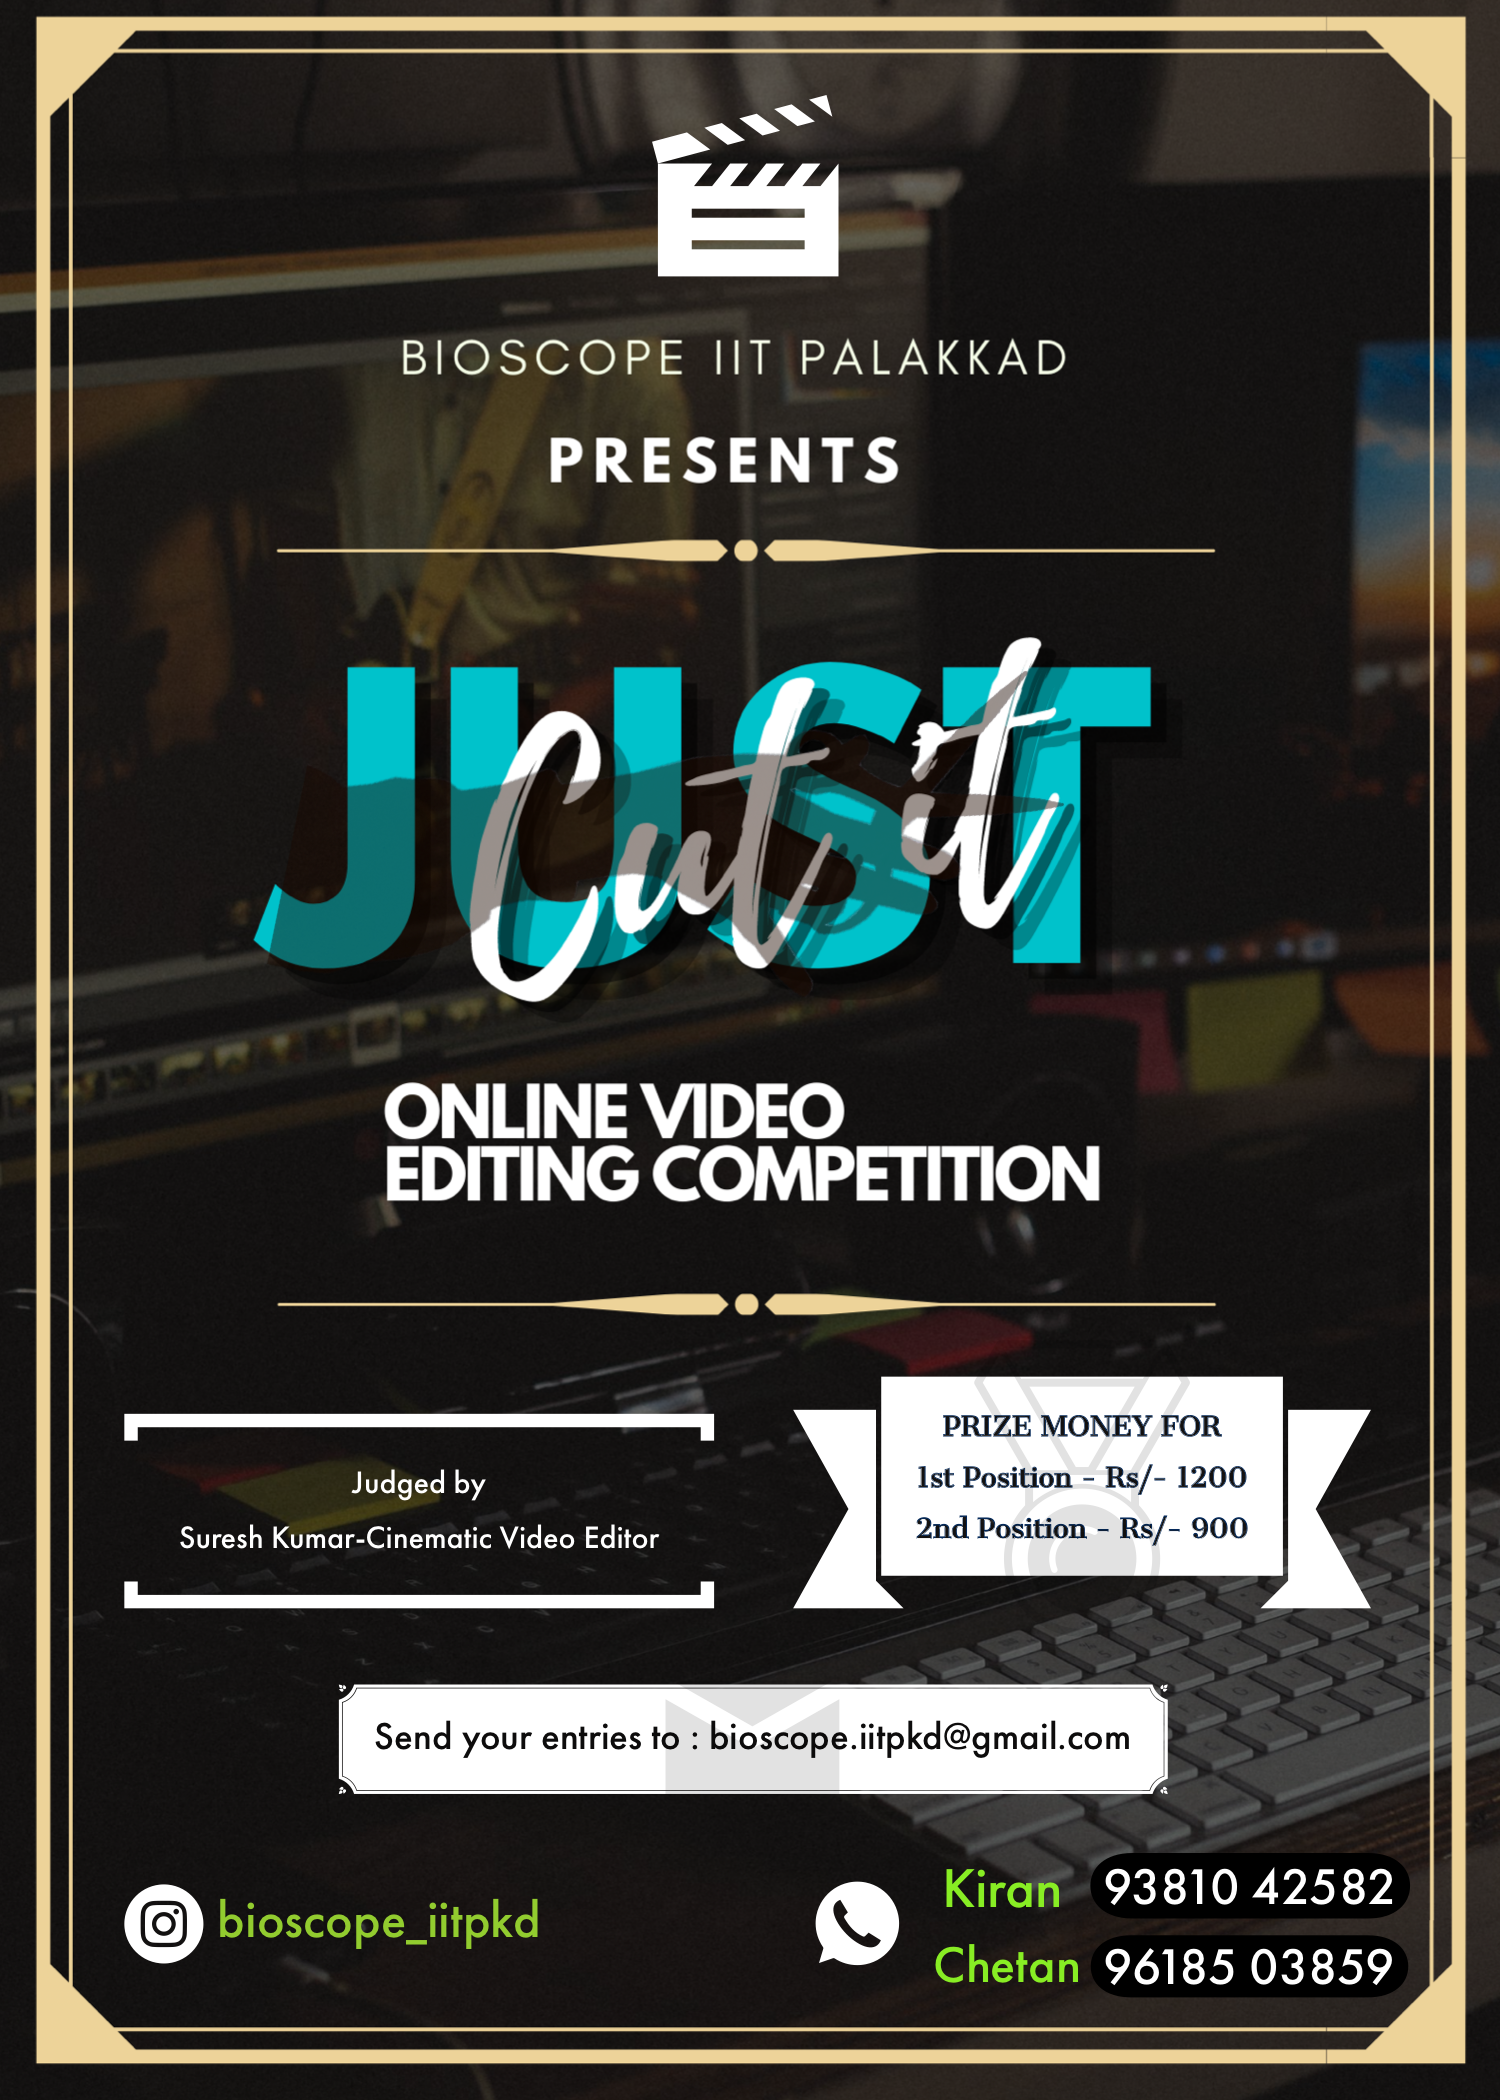 JUST CUT IT Online Video Editing Competition IIT Palakkad